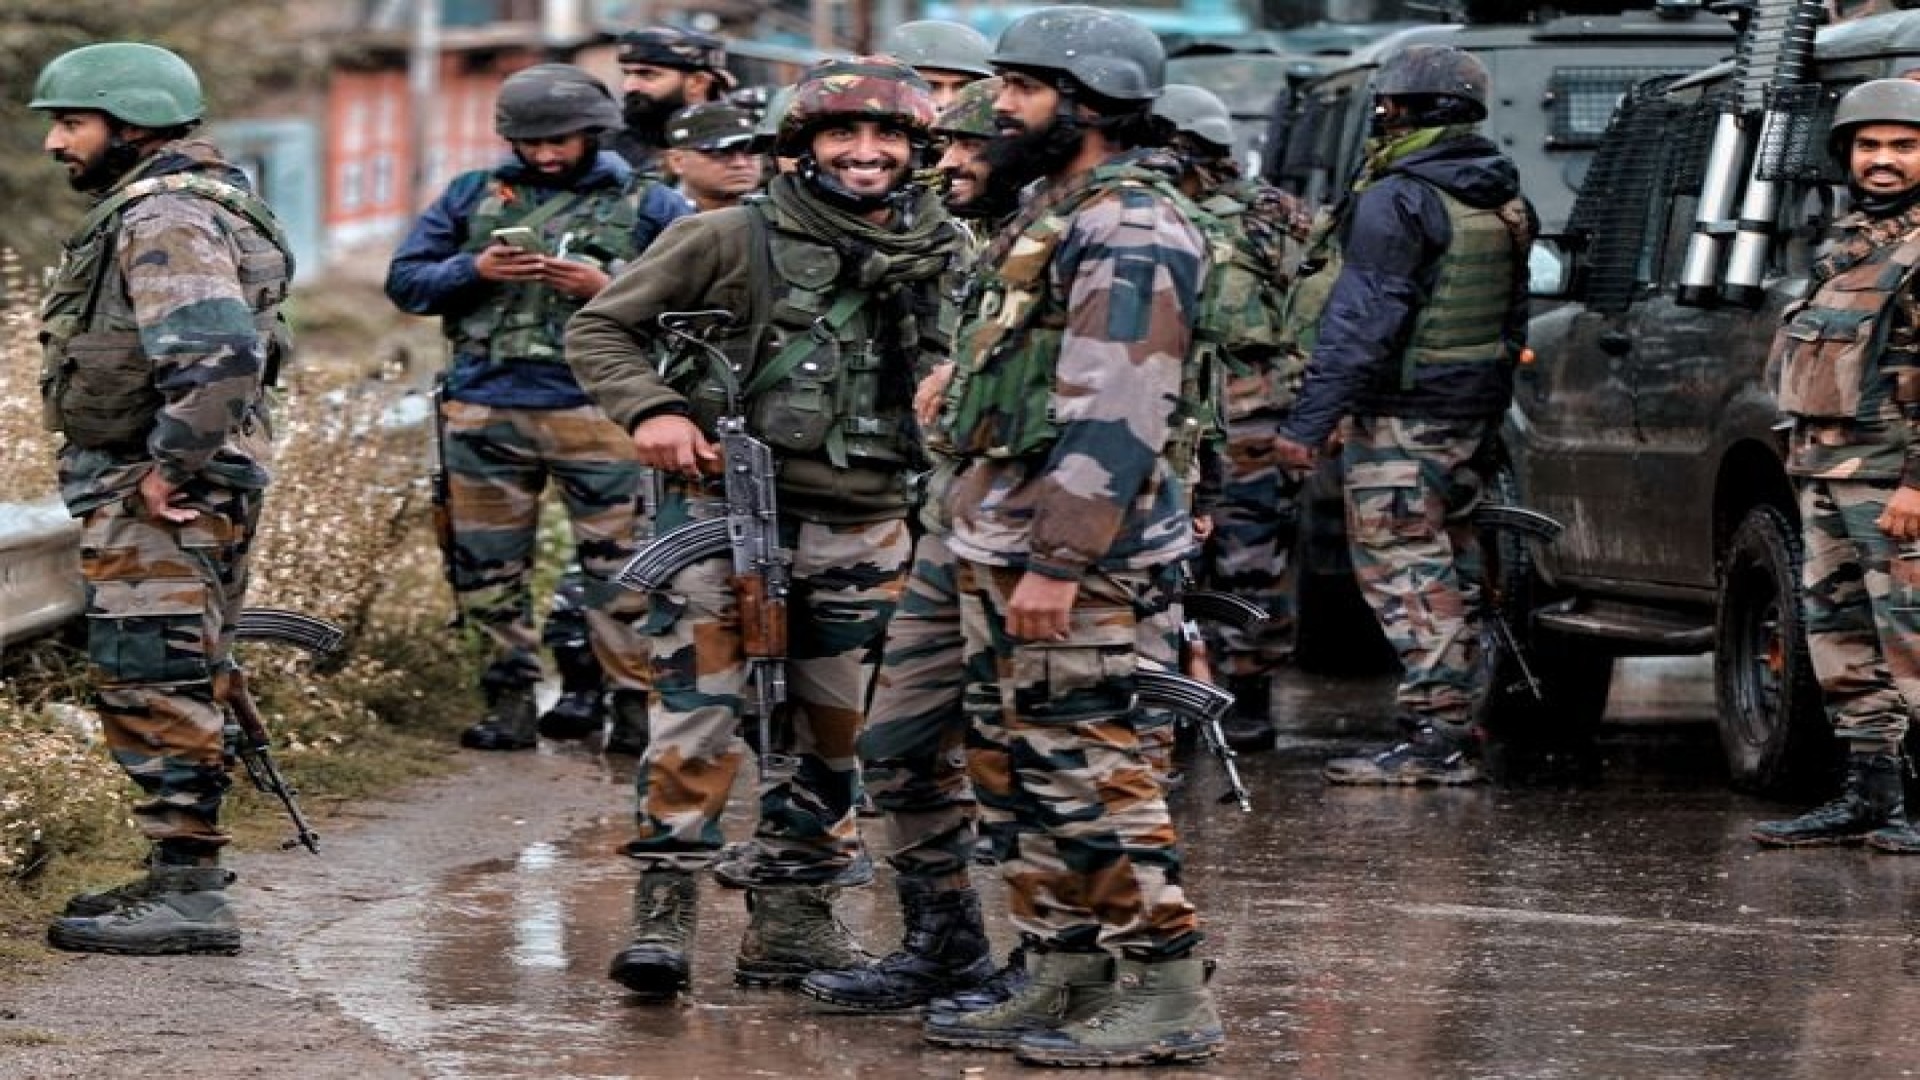 Image of a 52 Rashtriya Rifles, Indian army - standing tall after a successful military operation in Jammu & Kashmir India.